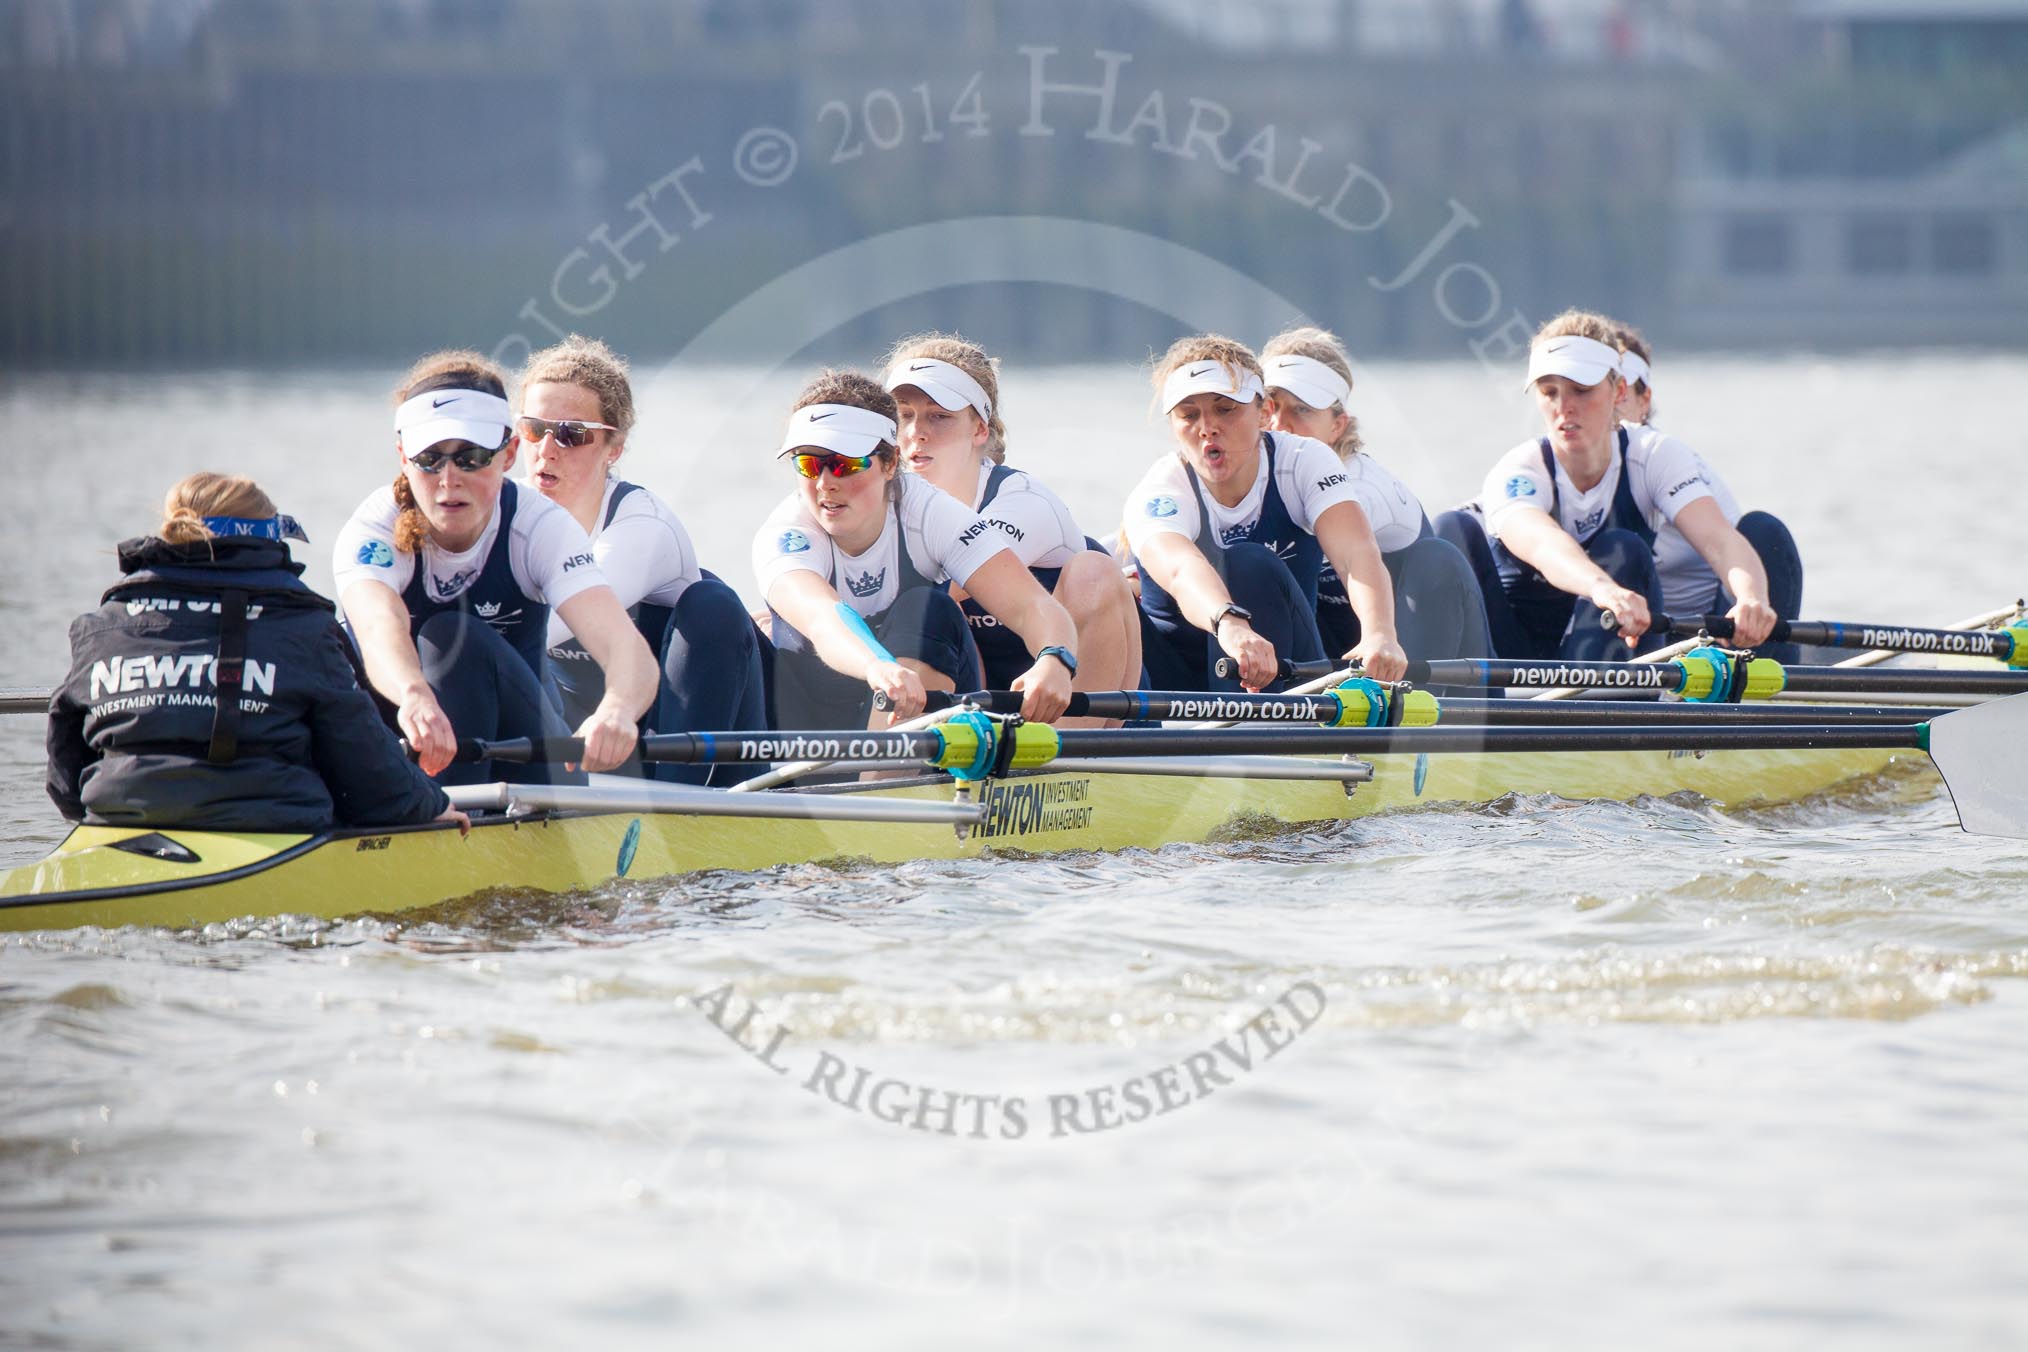 The Boat Race season 2014 - fixture OUWBC vs Molesey BC.




on 01 March 2014 at 12:32, image #62